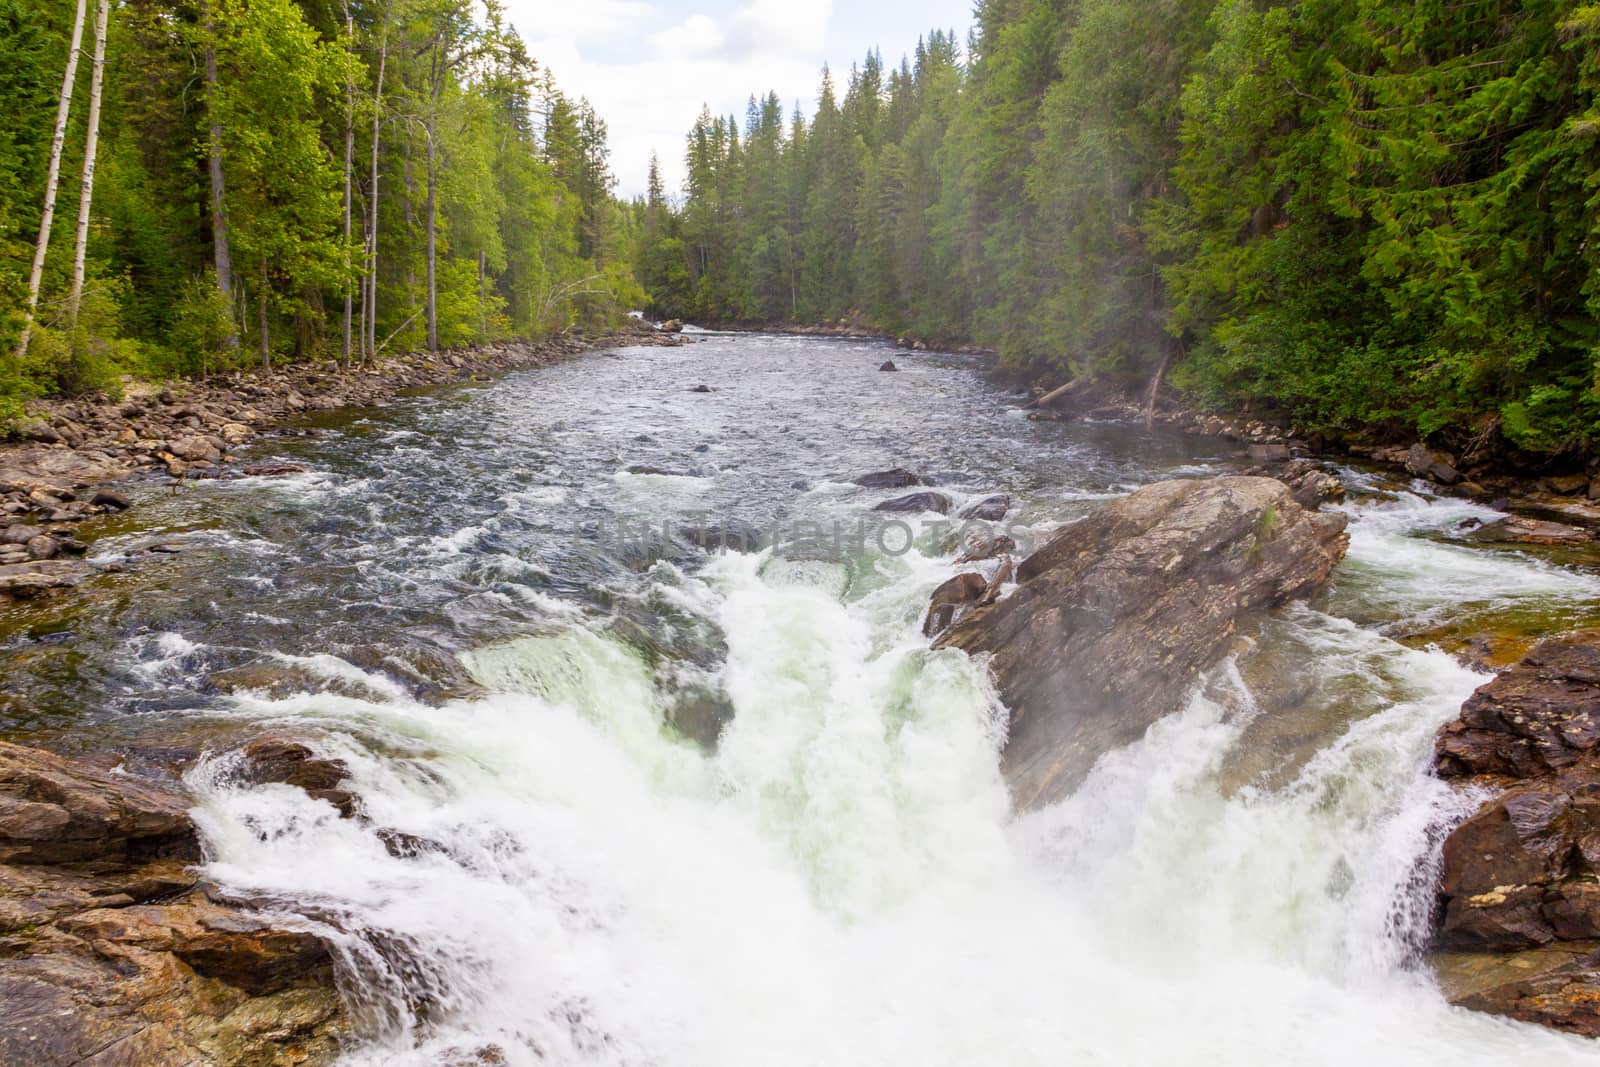 Murtle River Falls in Wells Gray Park, BC, Canada